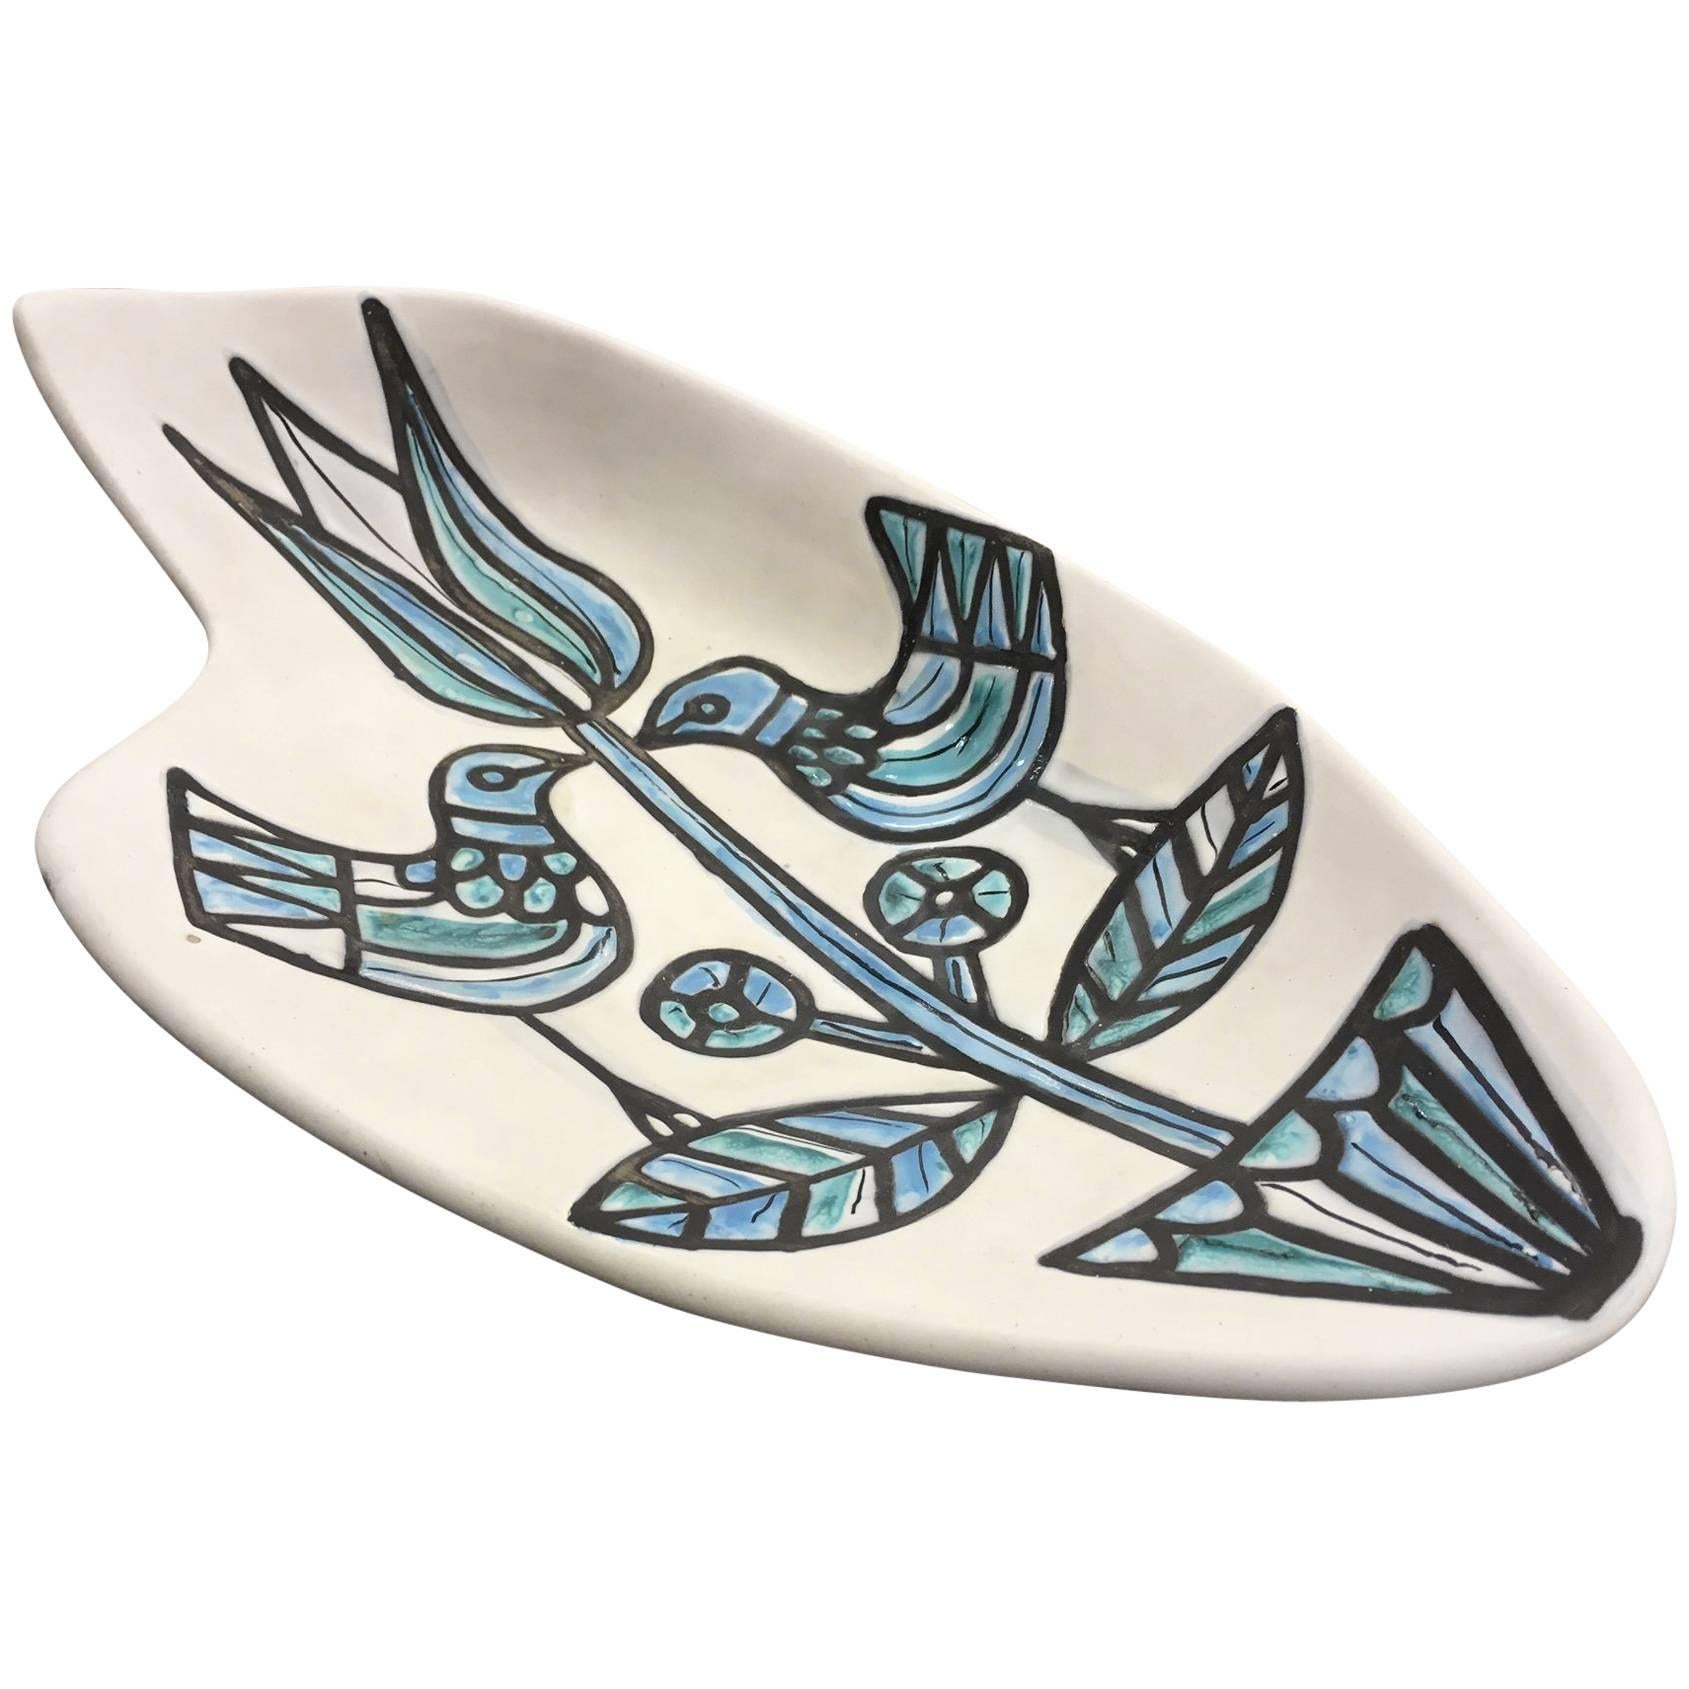 Roger Capron Beautiful and Large Ceramic Dish or Vide-Poche, circa 1960 For Sale